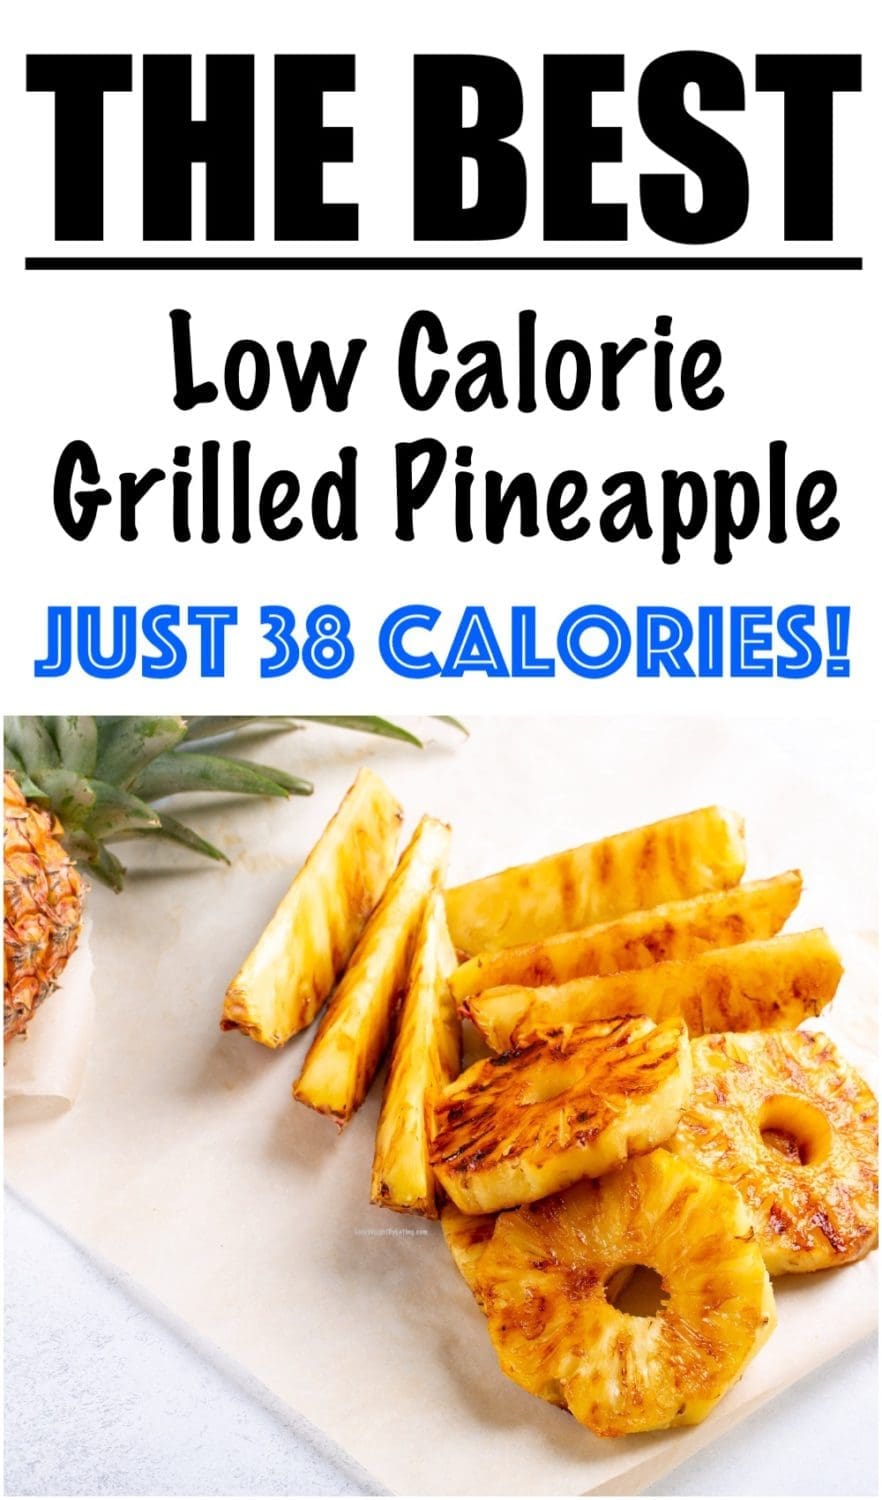 recipe for grilled pineapple